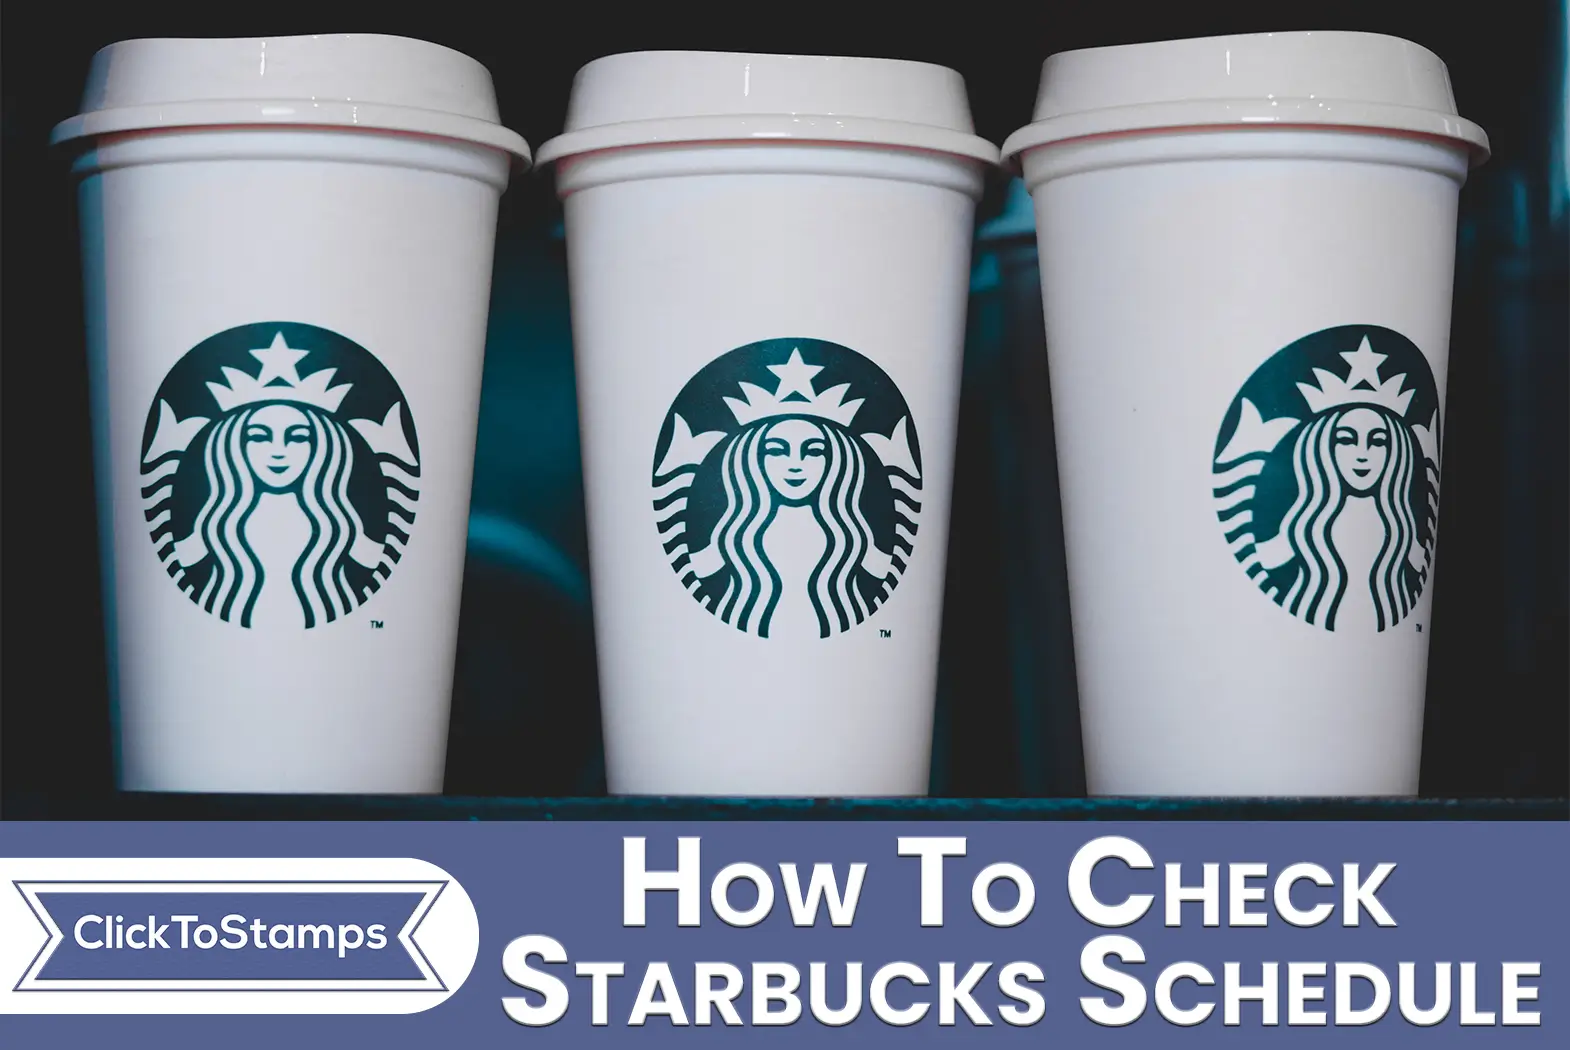 How To Check Starbucks Schedule